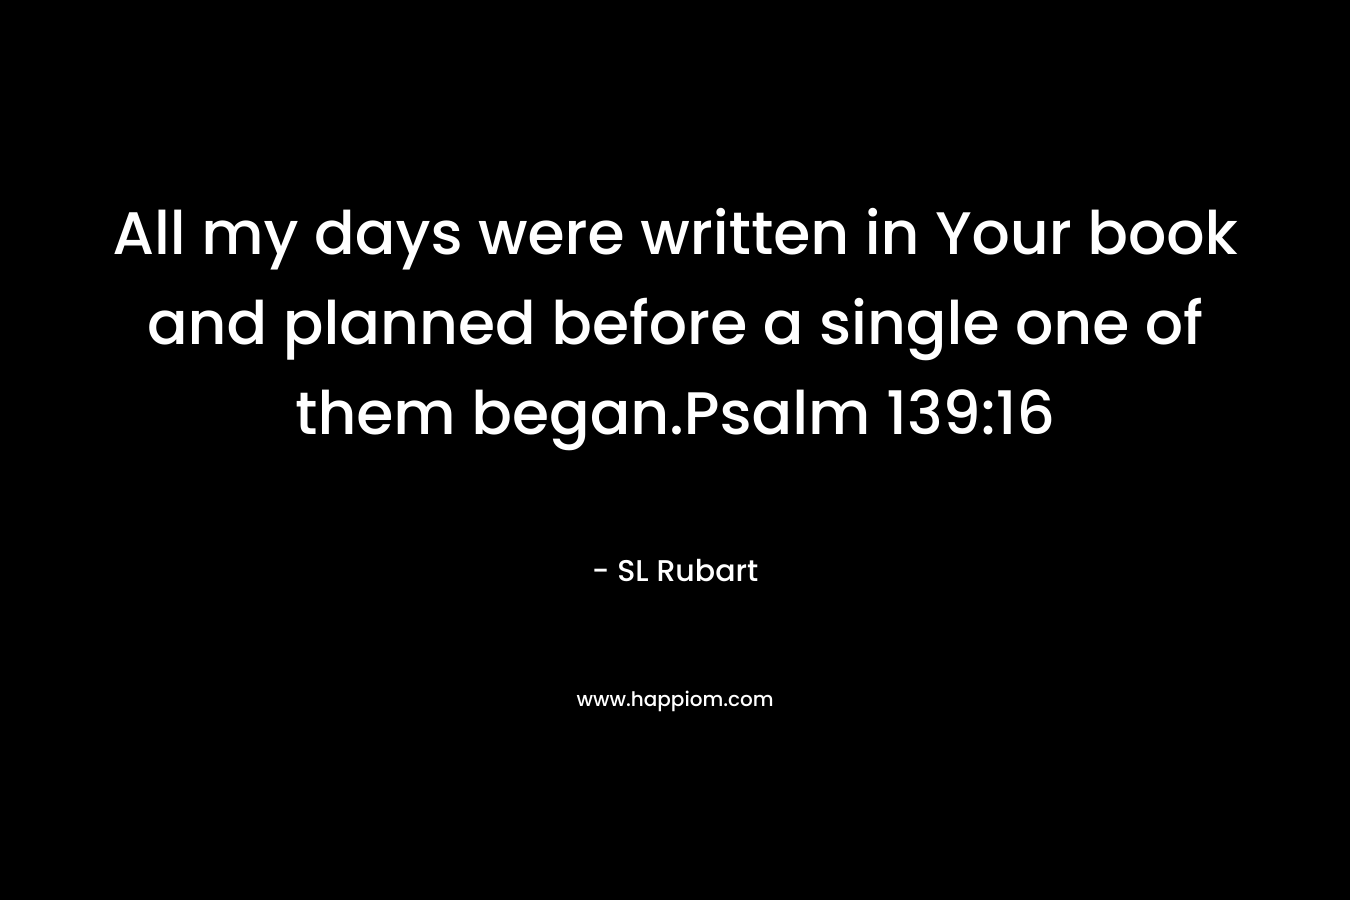 All my days were written in Your book and planned before a single one of them began.Psalm 139:16